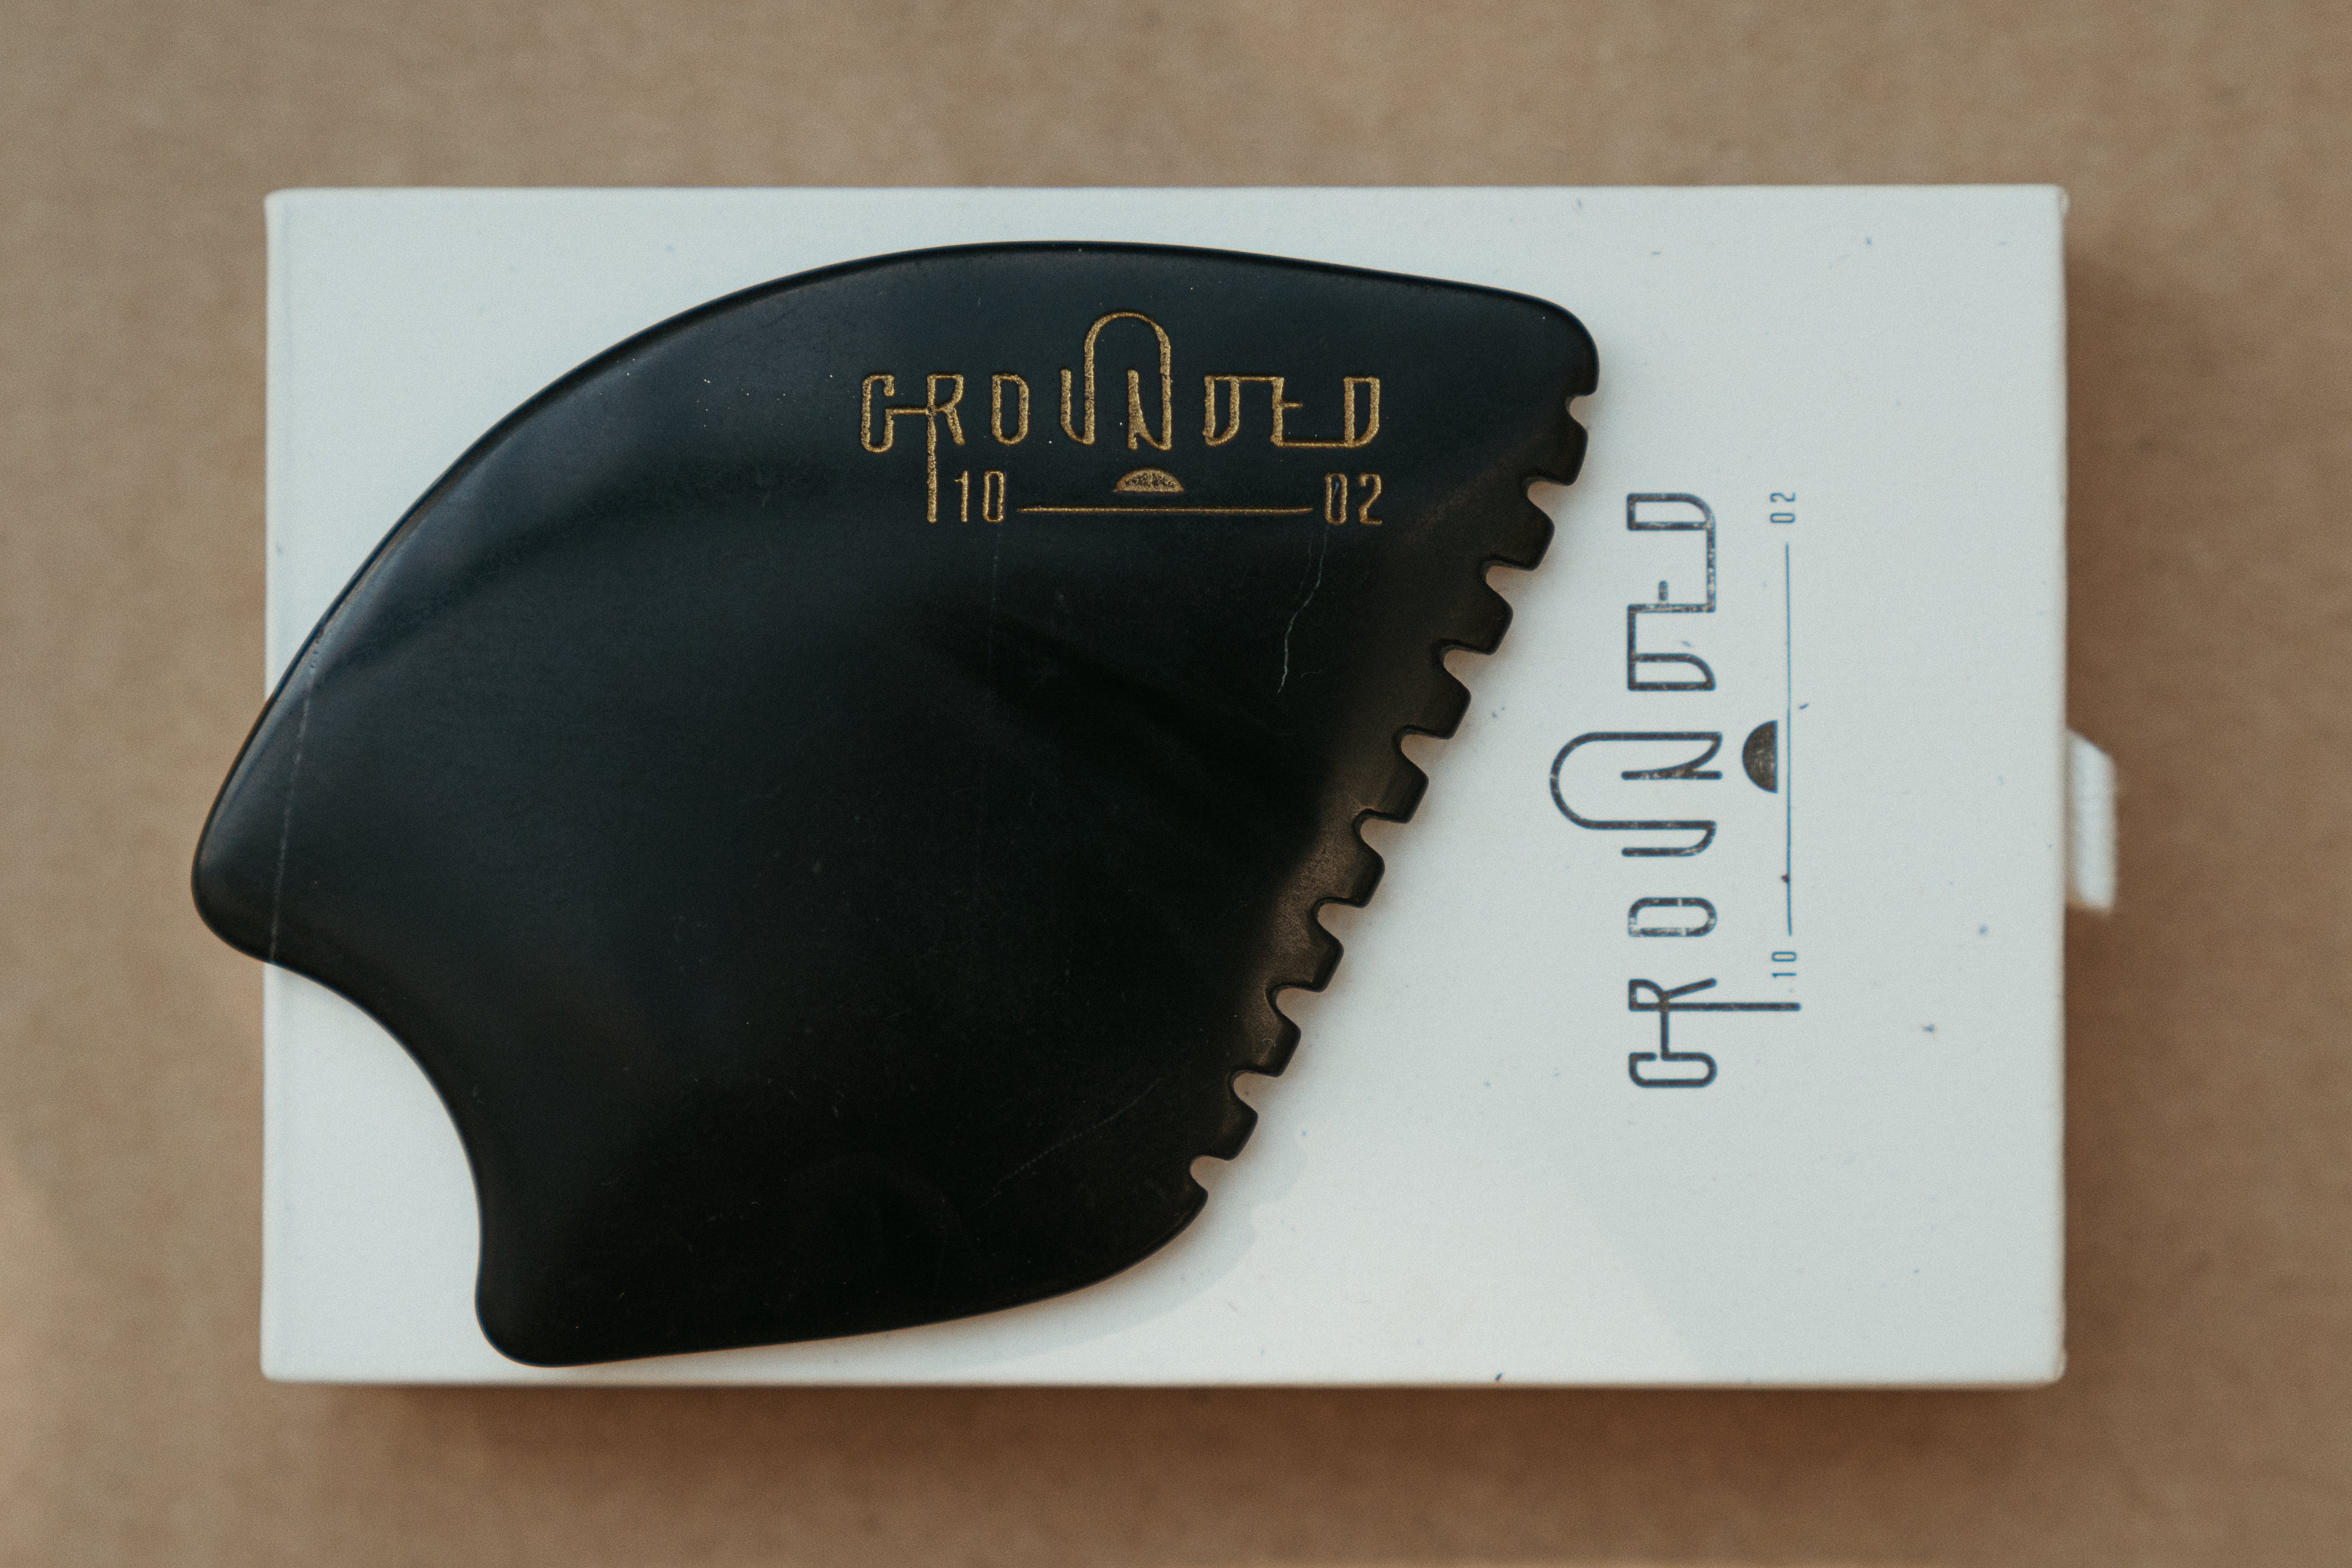 a palm sized black guasha tool (made from volcanic and metero matter) shaped into an abstract shape with one side ridged. The brand logo is engraved in a metallic copper colour.  The tool sitting on the drawer box it is sent in. 